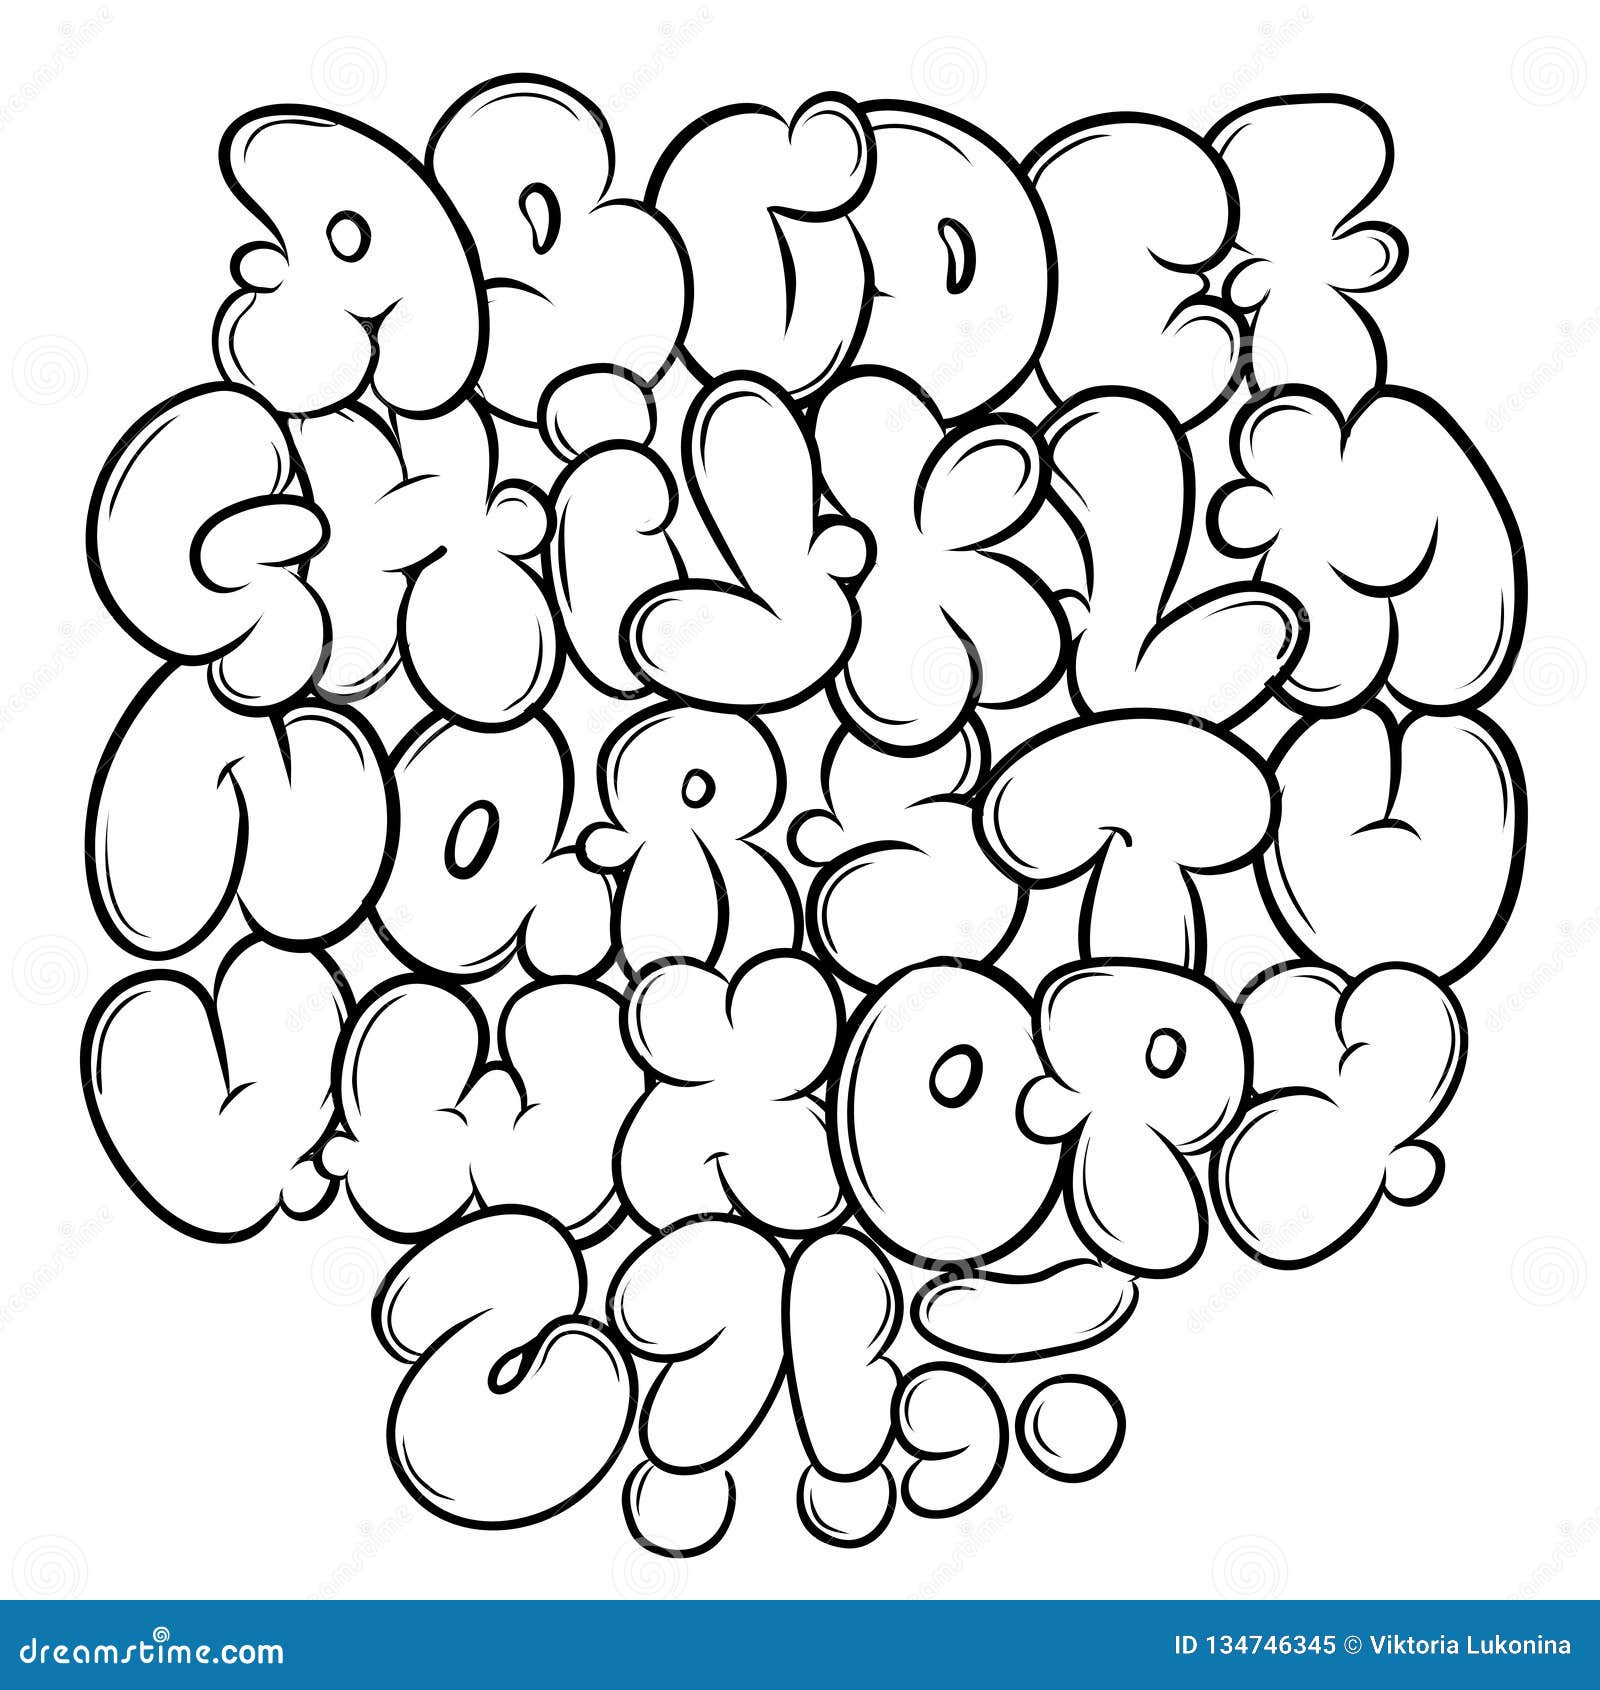 Set Street Type Calligraphy Design Alphabet Graffiti Style Tag Letters  Write Marker Brush Ink Or Aerosol Paint Spray. Stock Vector - Illustration  Of Type, Isolated: 134746345